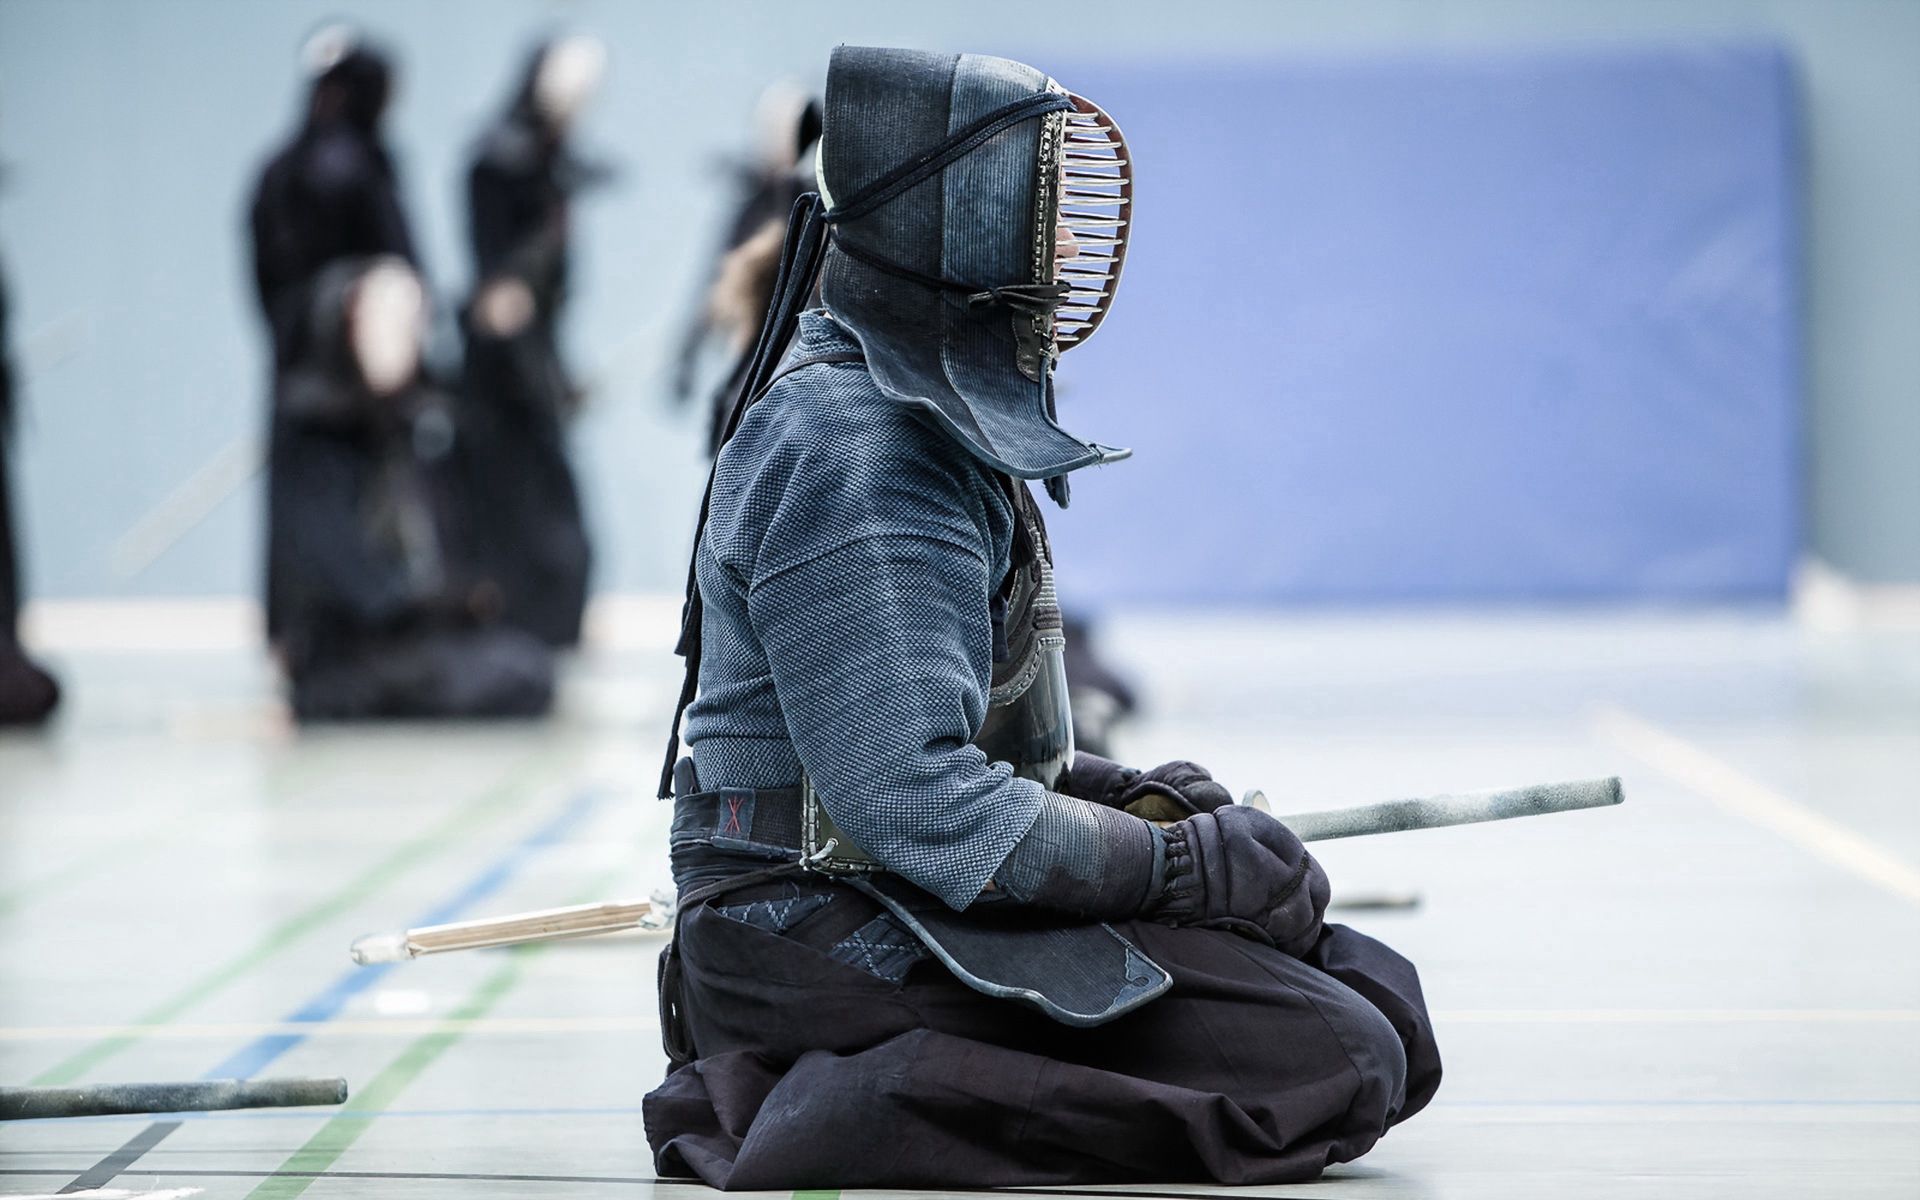 sports, fencing, kendo, fighter